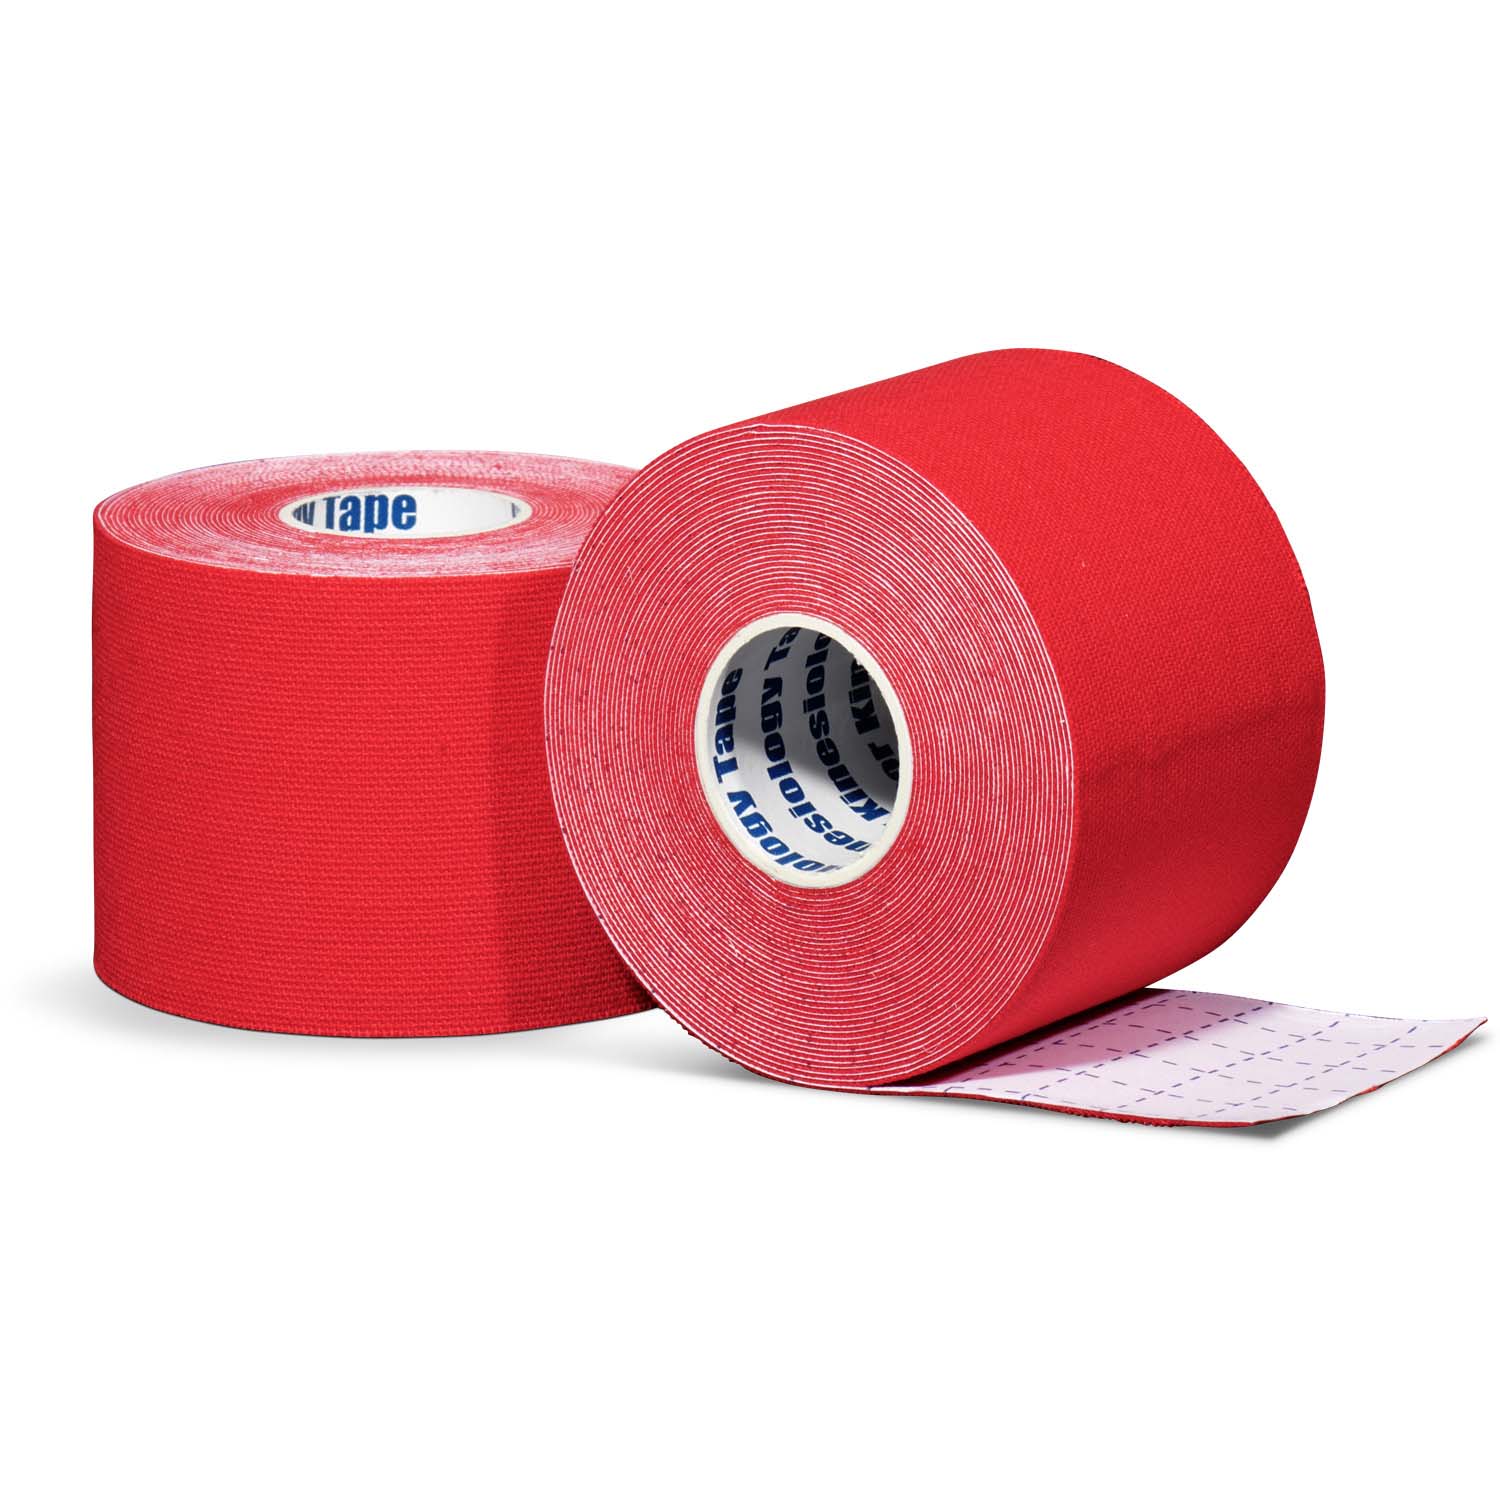 Kinesiology tape per roll red front and back view